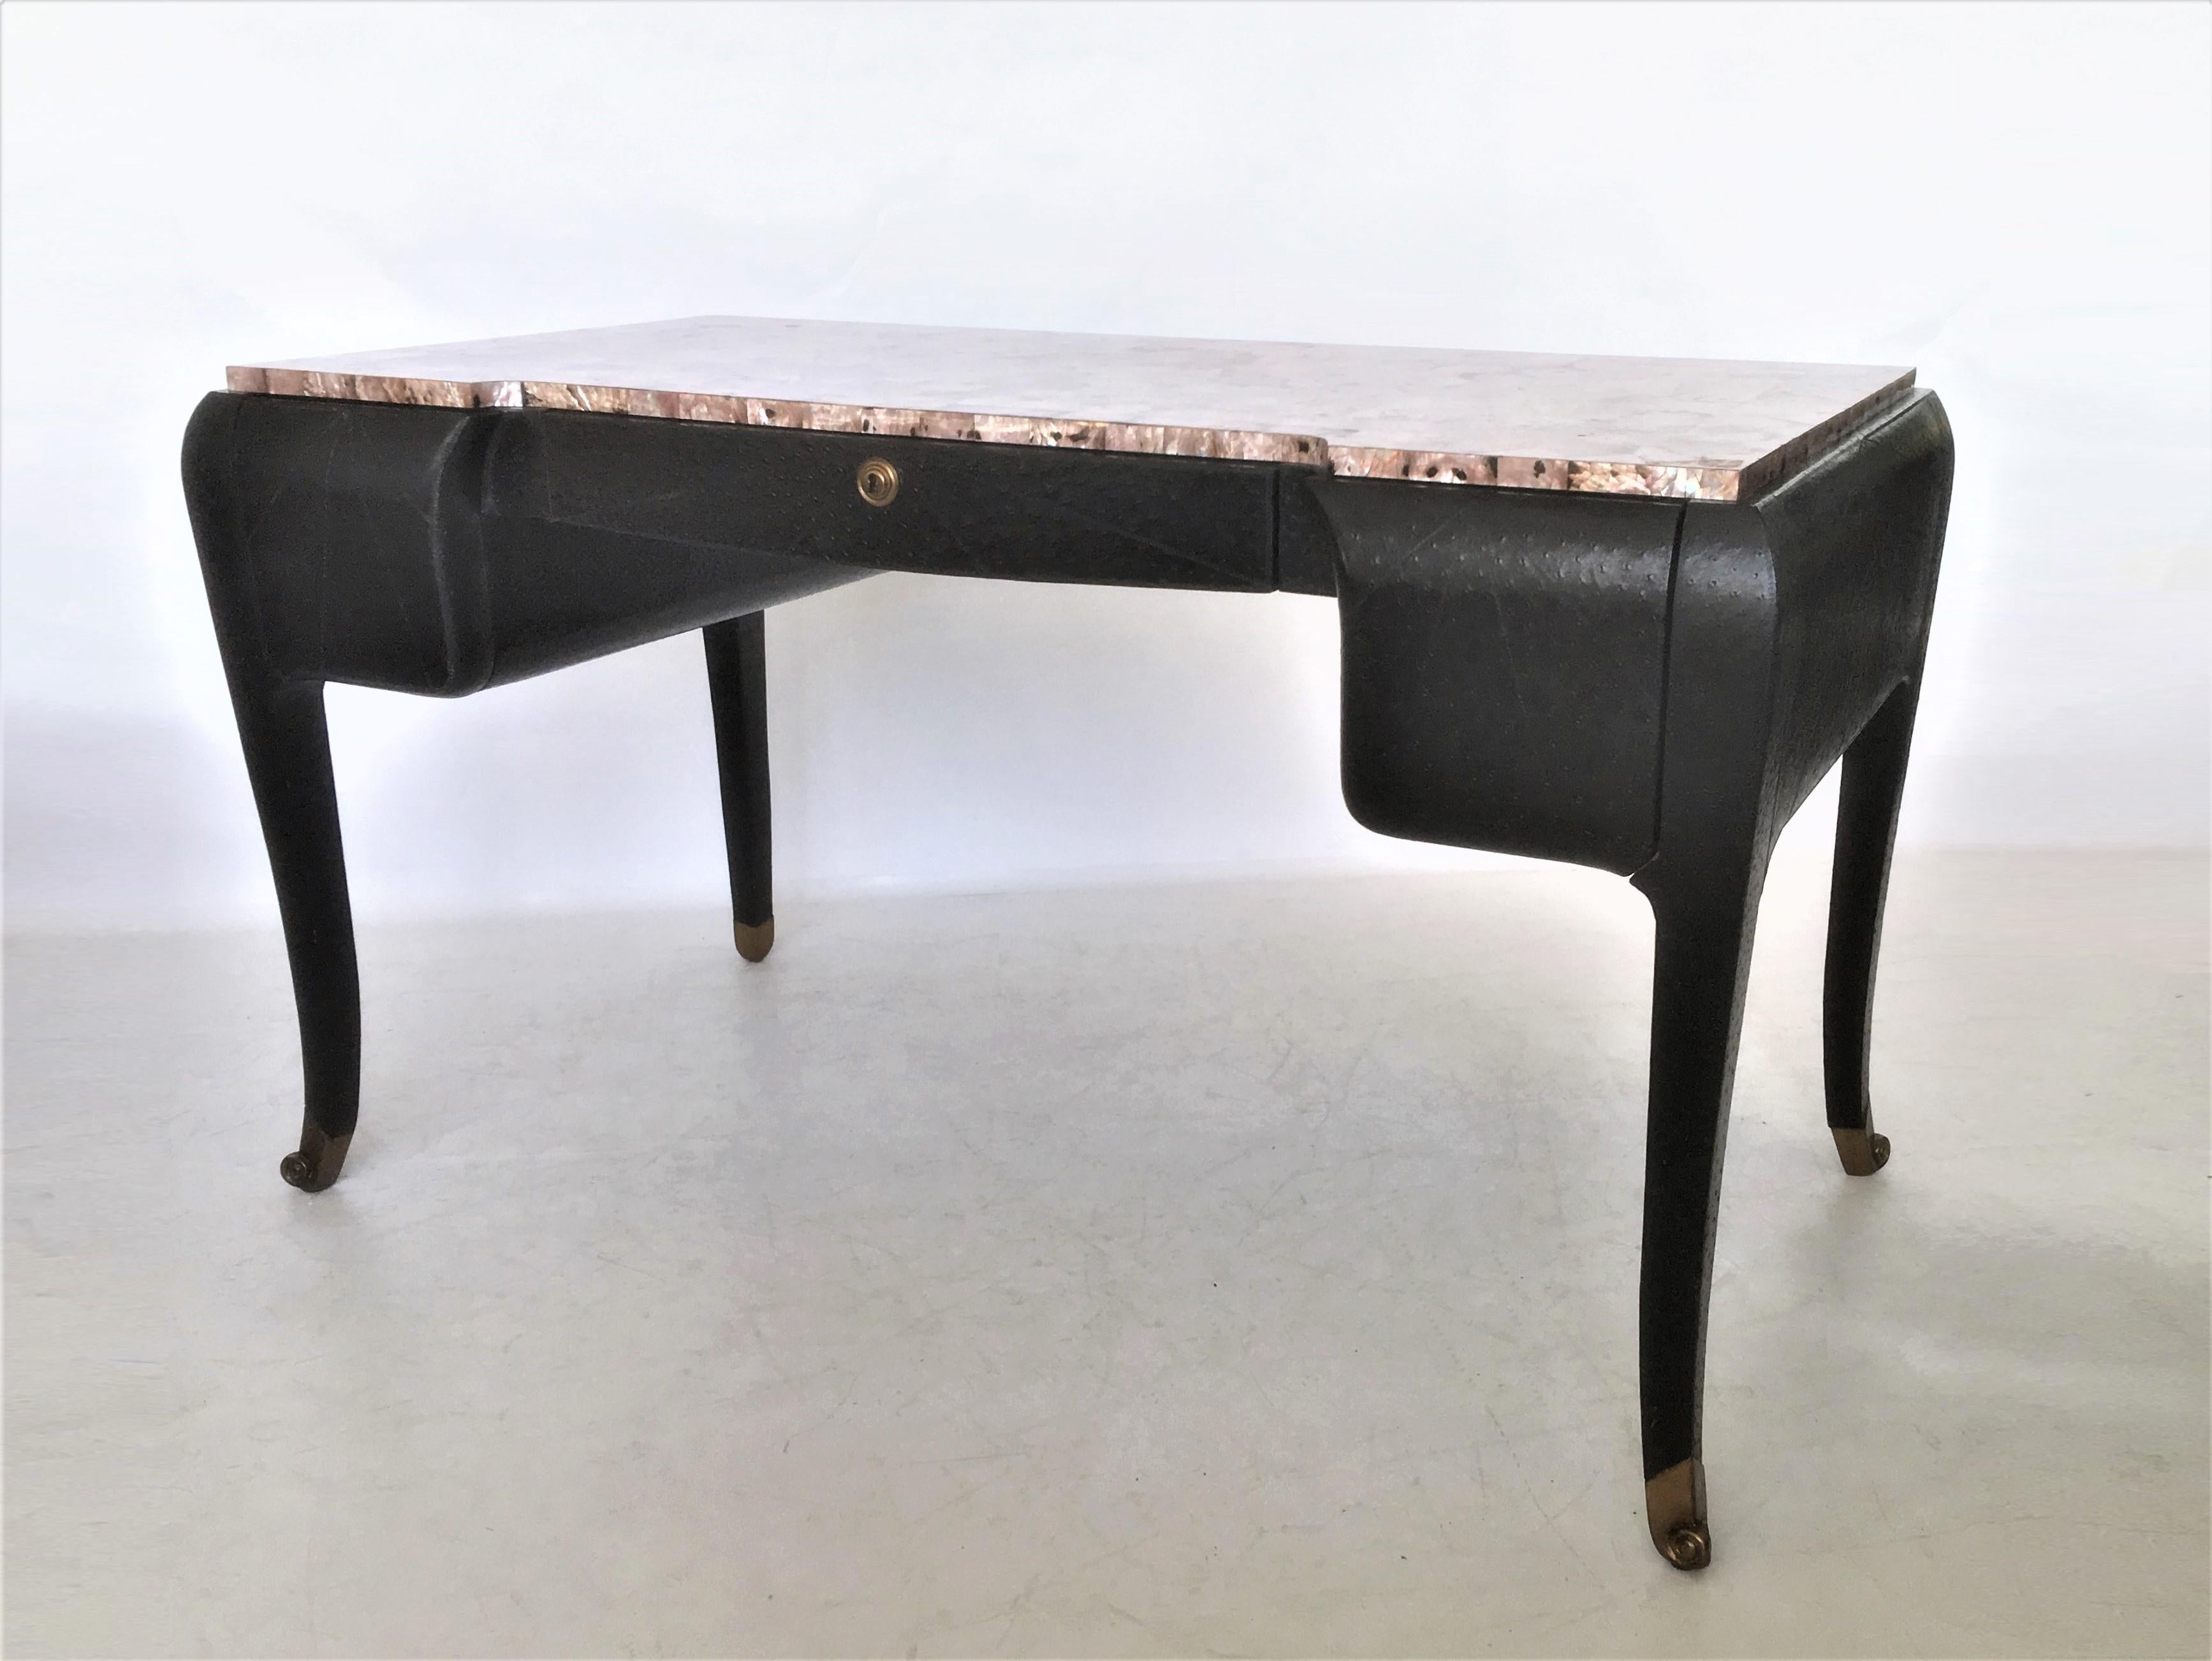 Embossed Art Deco Style Maitland-Smith Faux Ostrich Leather Writing Desk For Sale